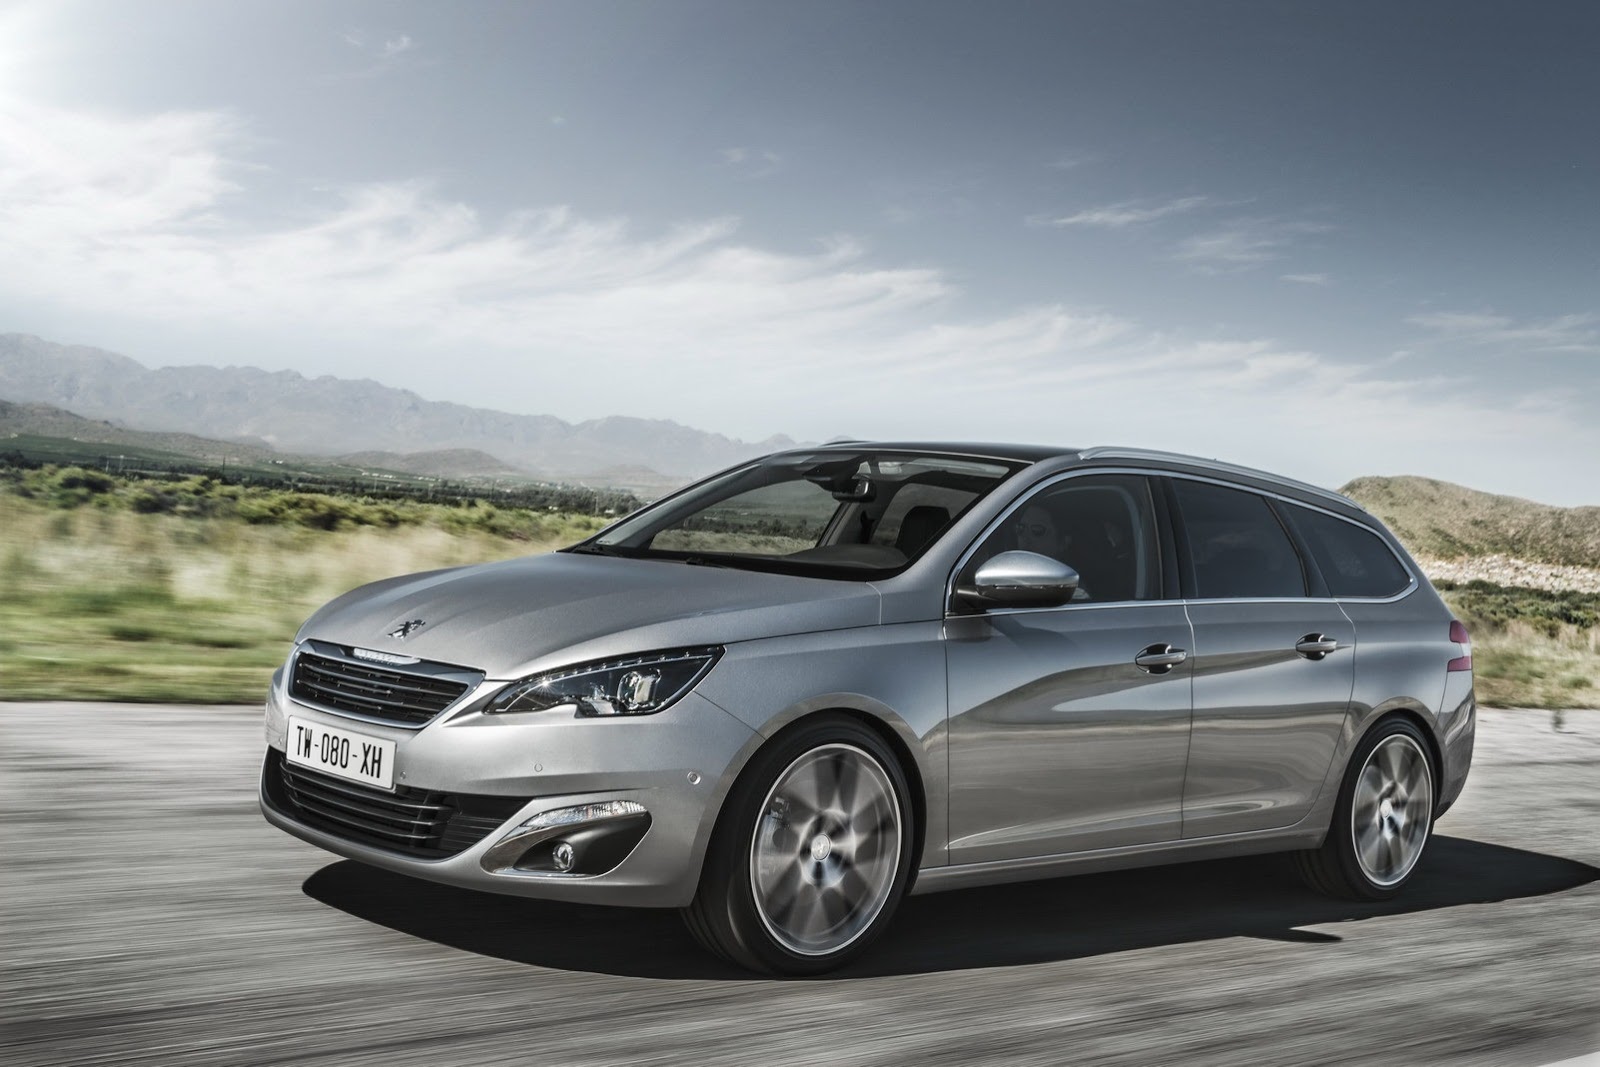 Peugeot 308 SW wagon looks about as good as its big 508 sibling - Autoblog